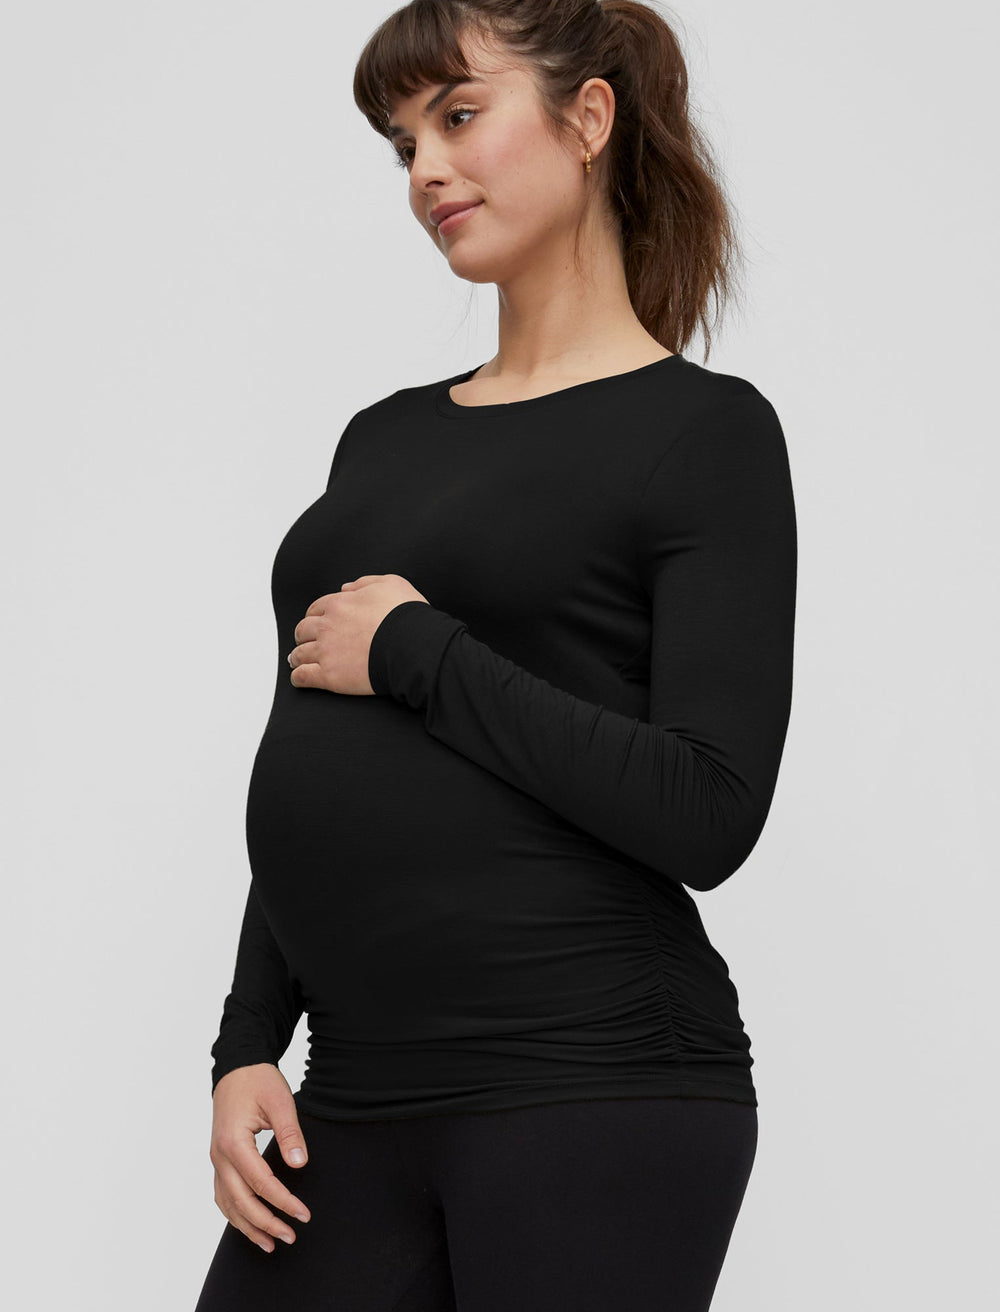 New Short Sleeved Nursing Maternity Top with Ruched Sides T-Shirt Soft &  Comfy